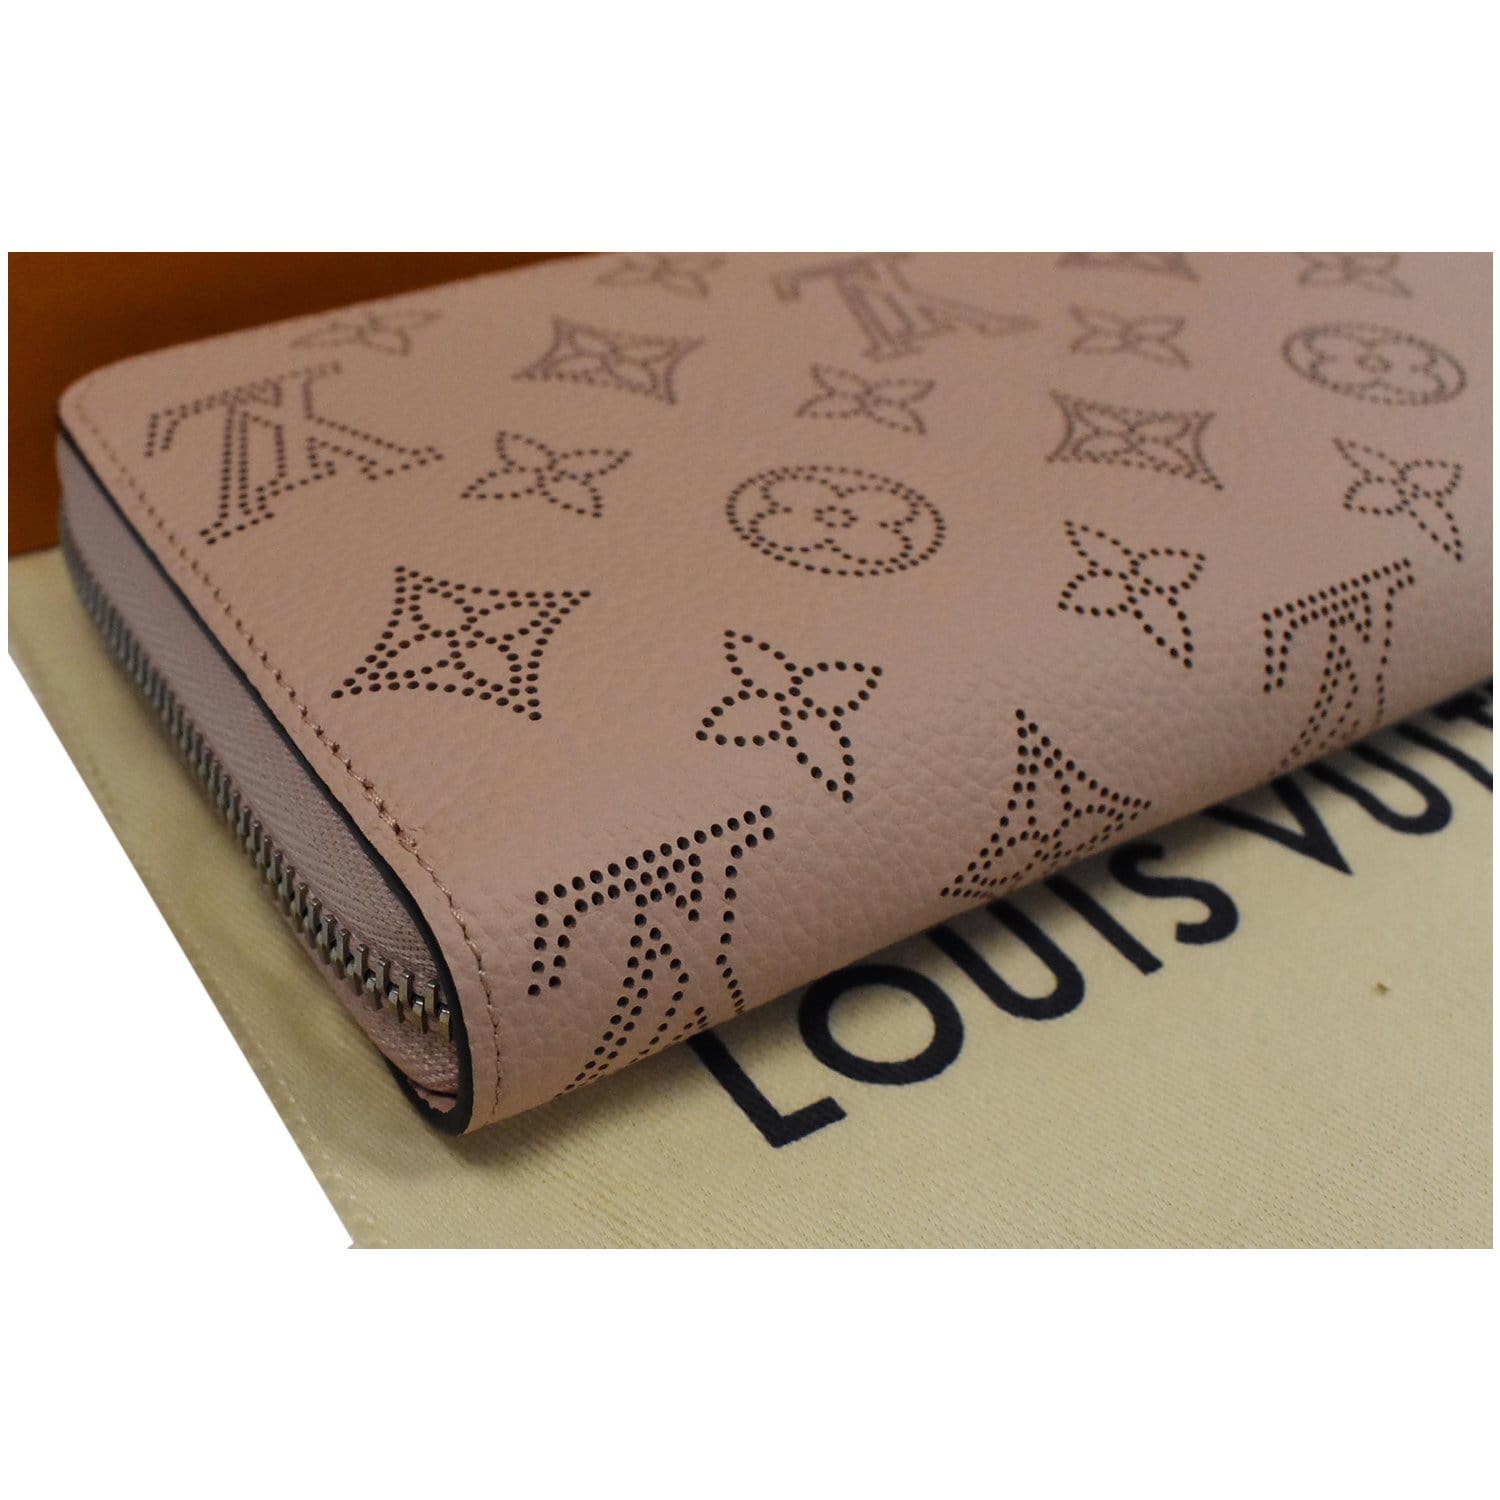 Zippy Wallet Mahina Leather - Wallets and Small Leather Goods